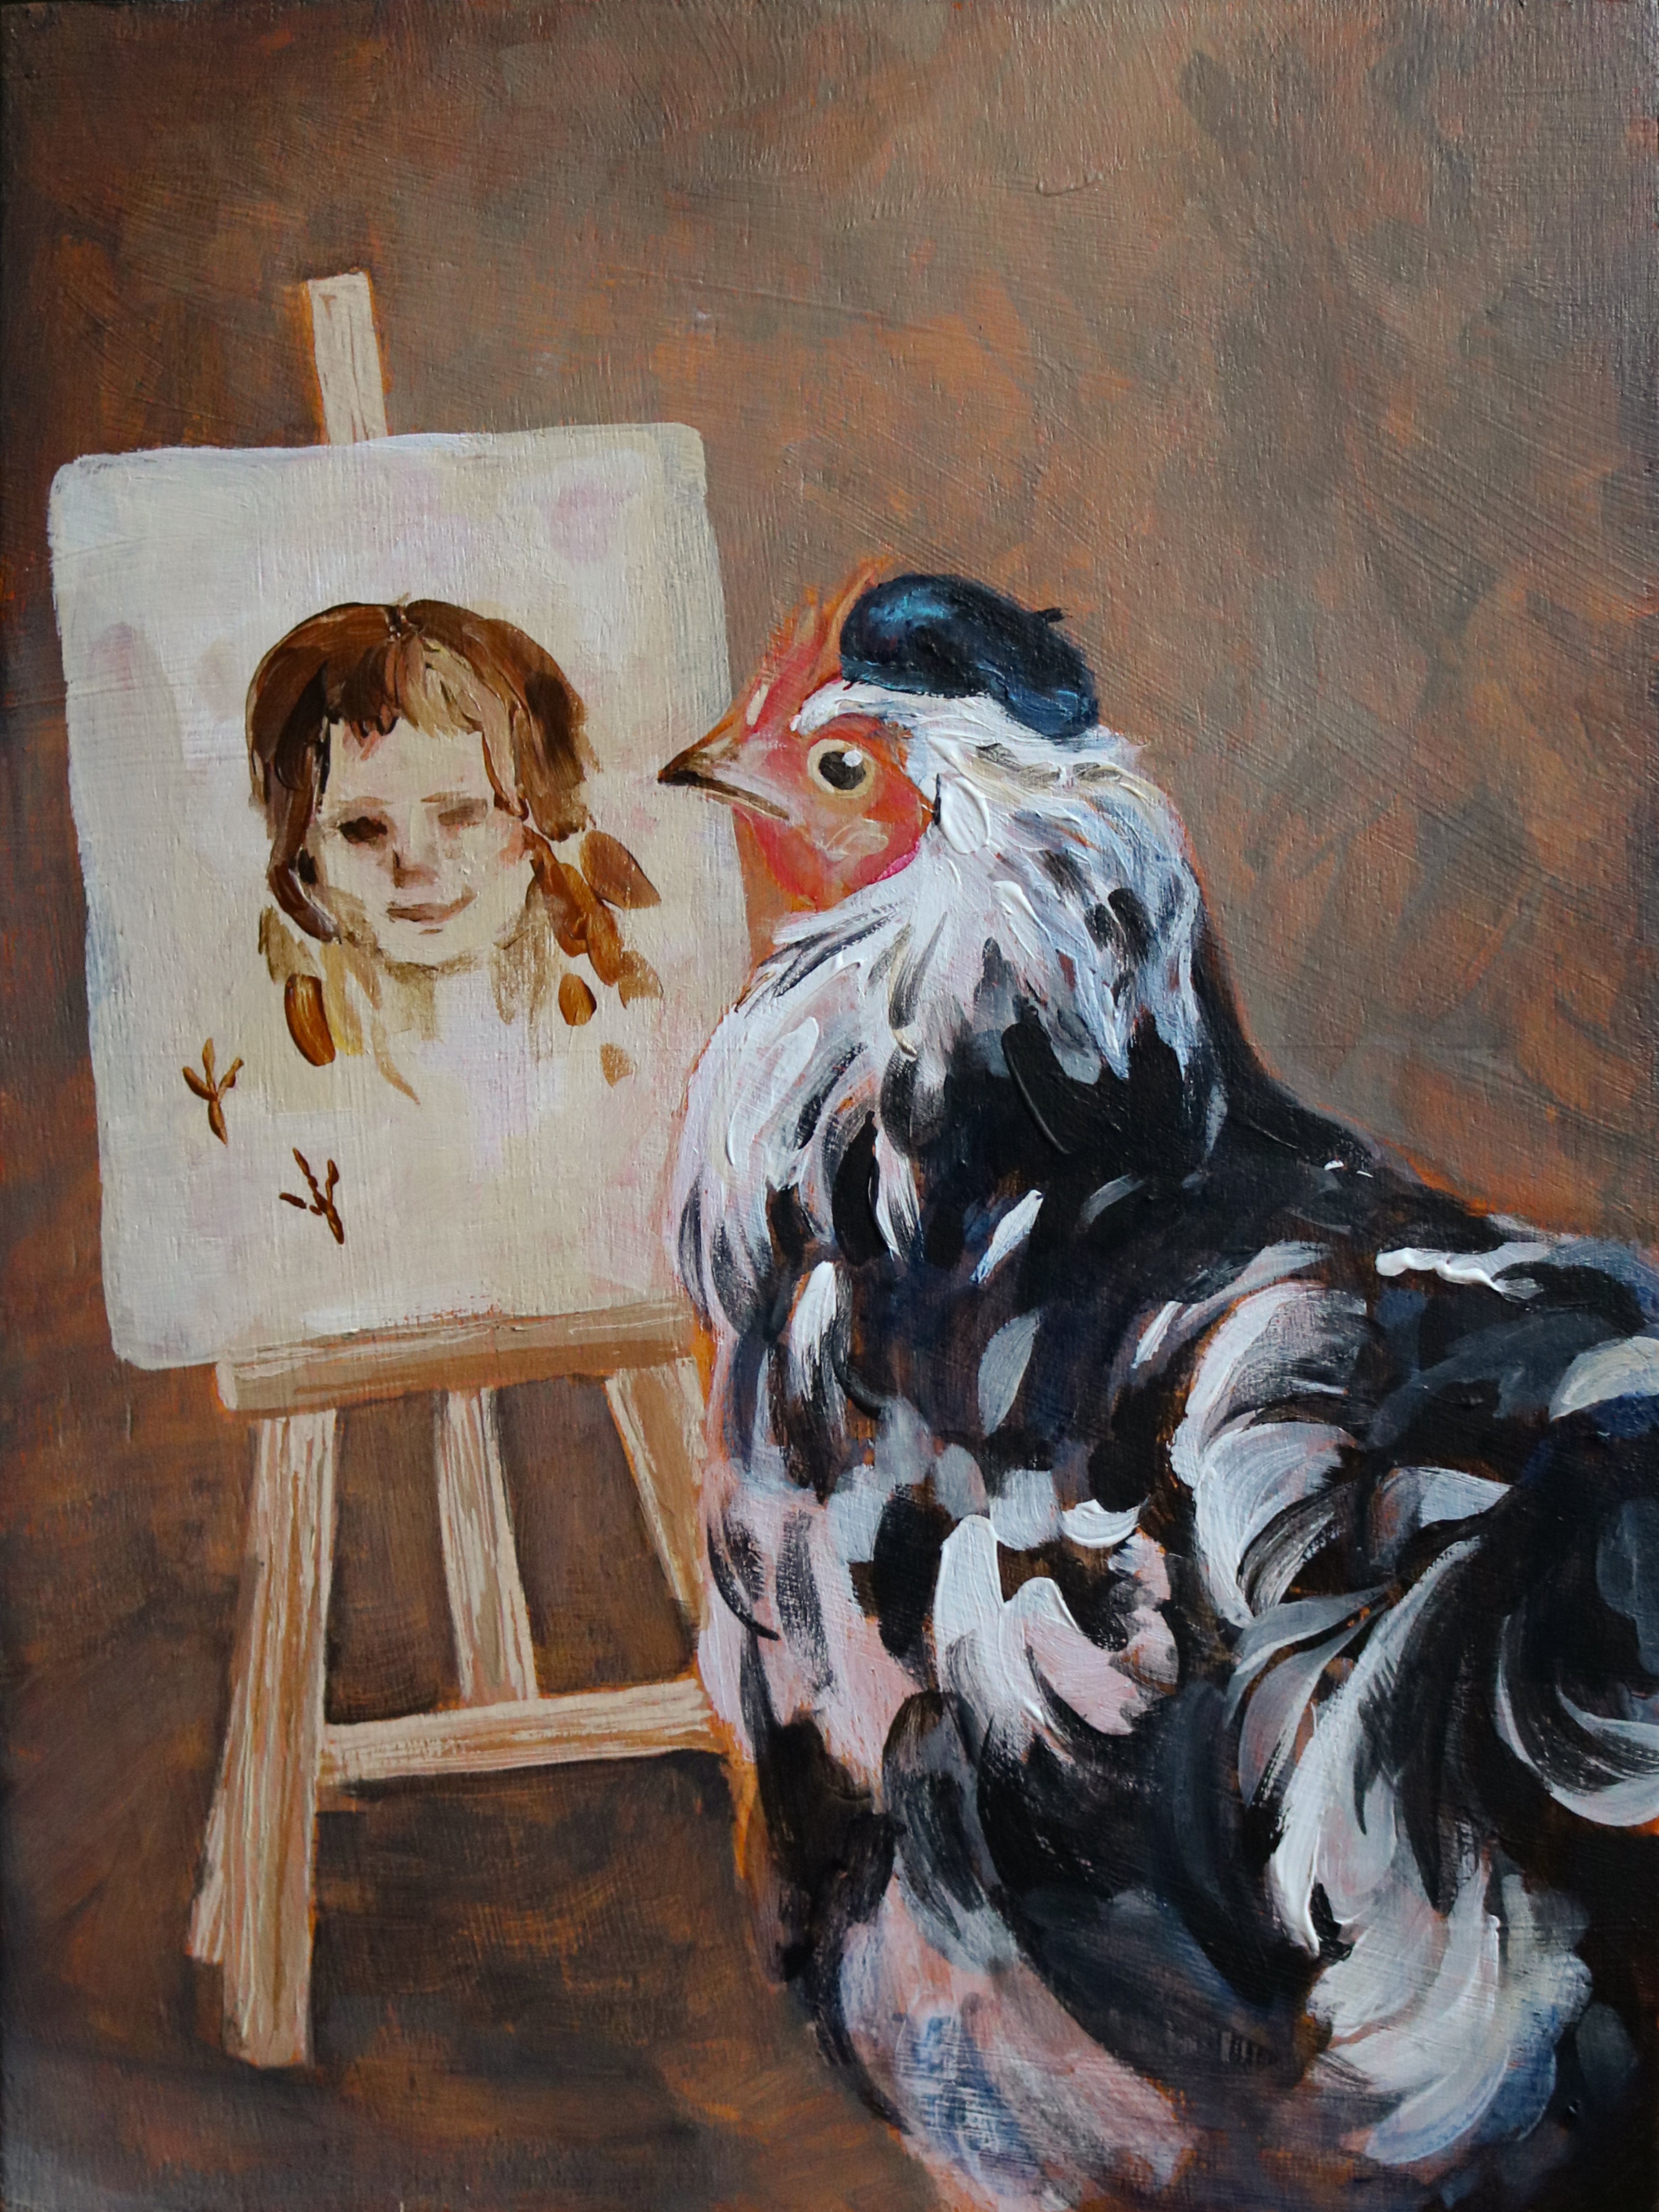 "Cawblo Peckasso", an acrylic painting by Jackie Hanson, depicting a black-and-white chicken wearing a beret in front of an easel. The easel has a canvas with a primitive portrait of a woman in the center.